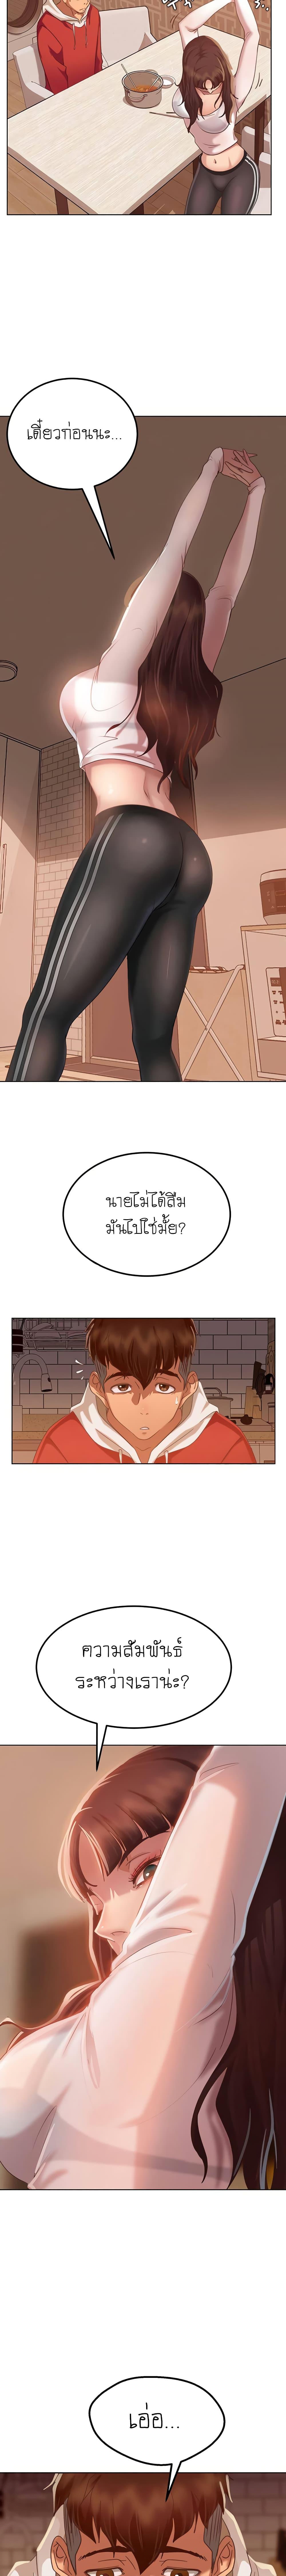 A Twisted Day 1 ภาพ 21